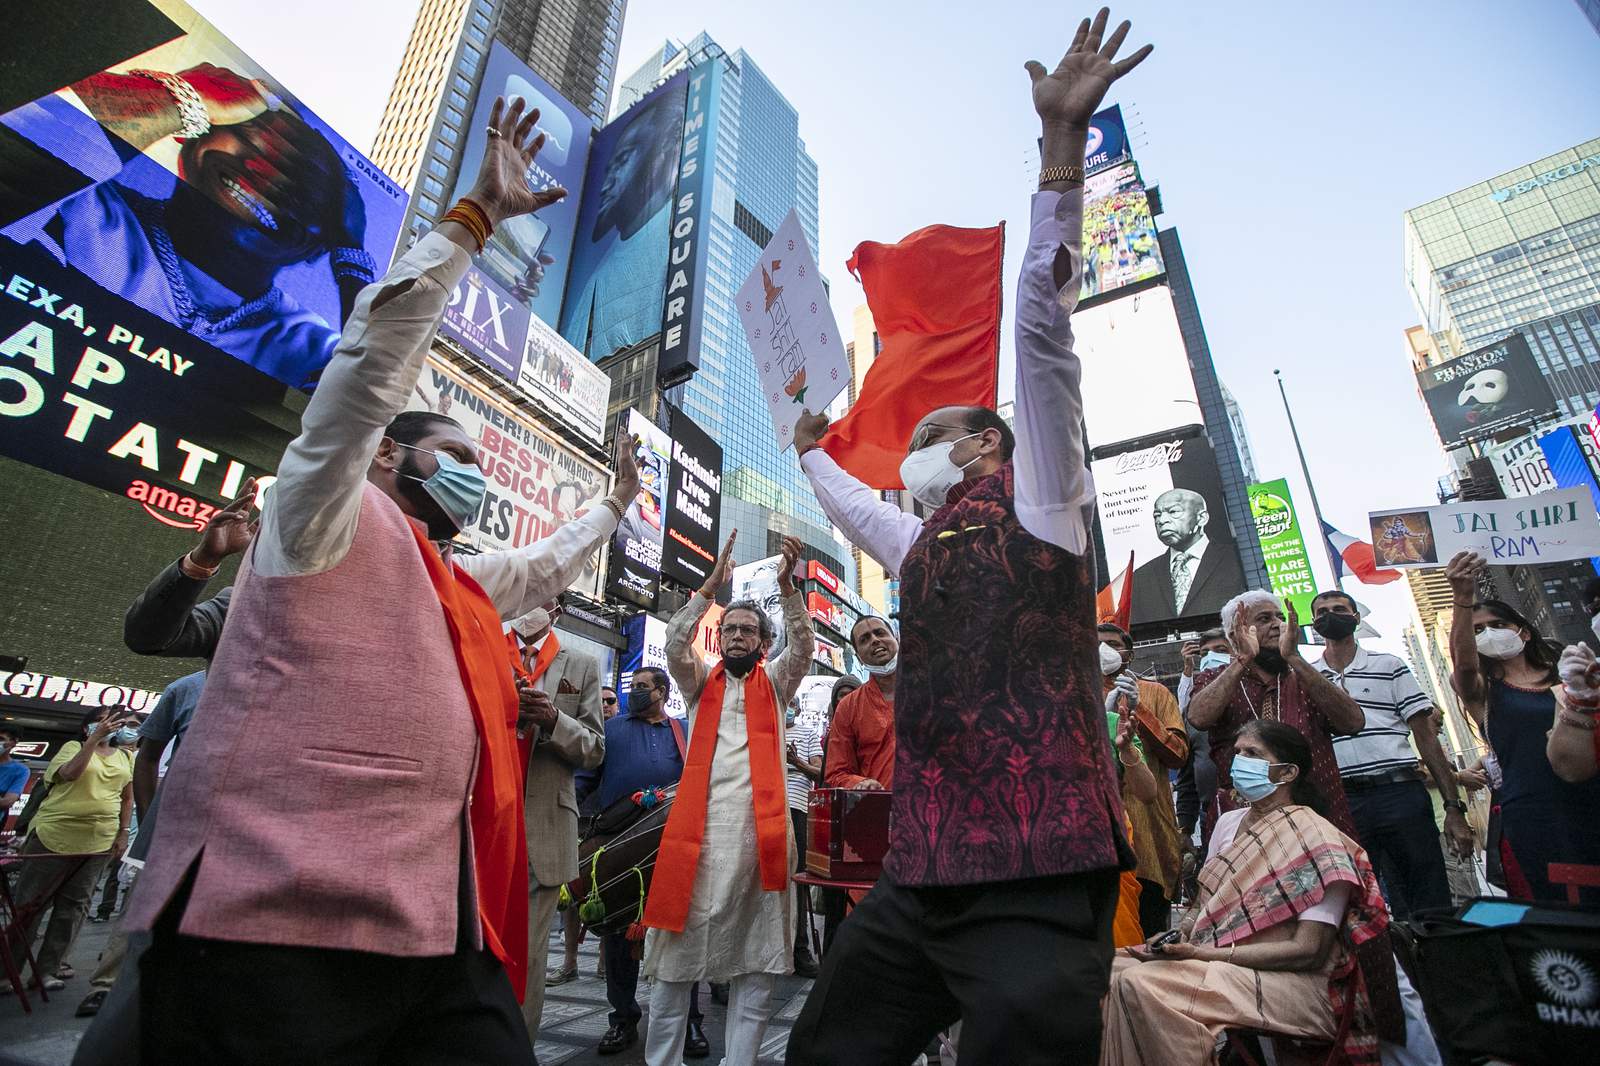 Supporters, opponents of Hindu temple meet in Times Square